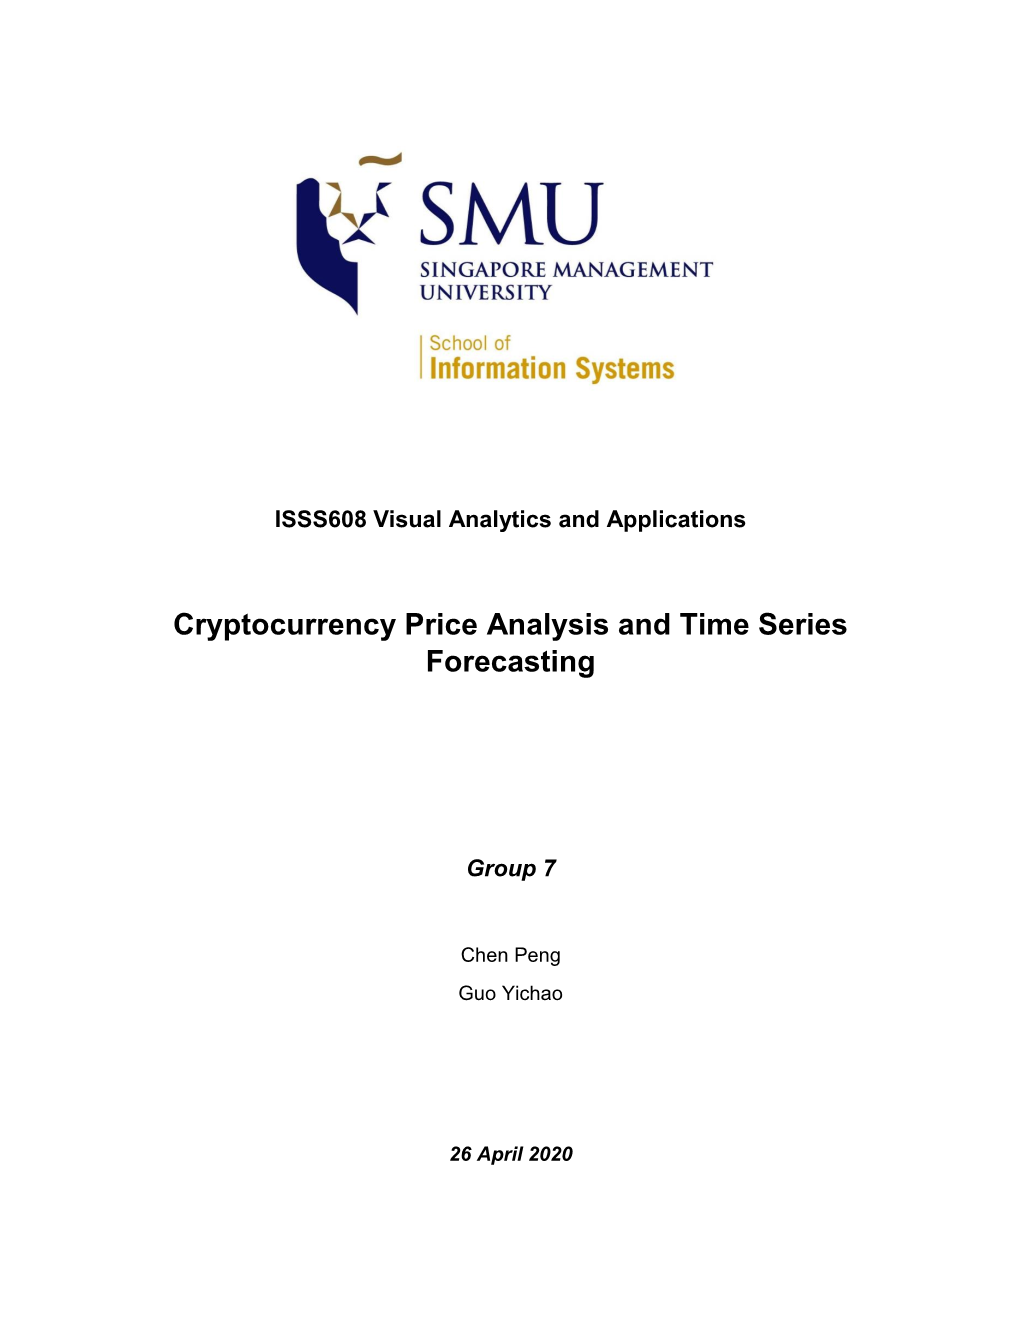 Cryptocurrency Price Analysis and Time Series Forecasting